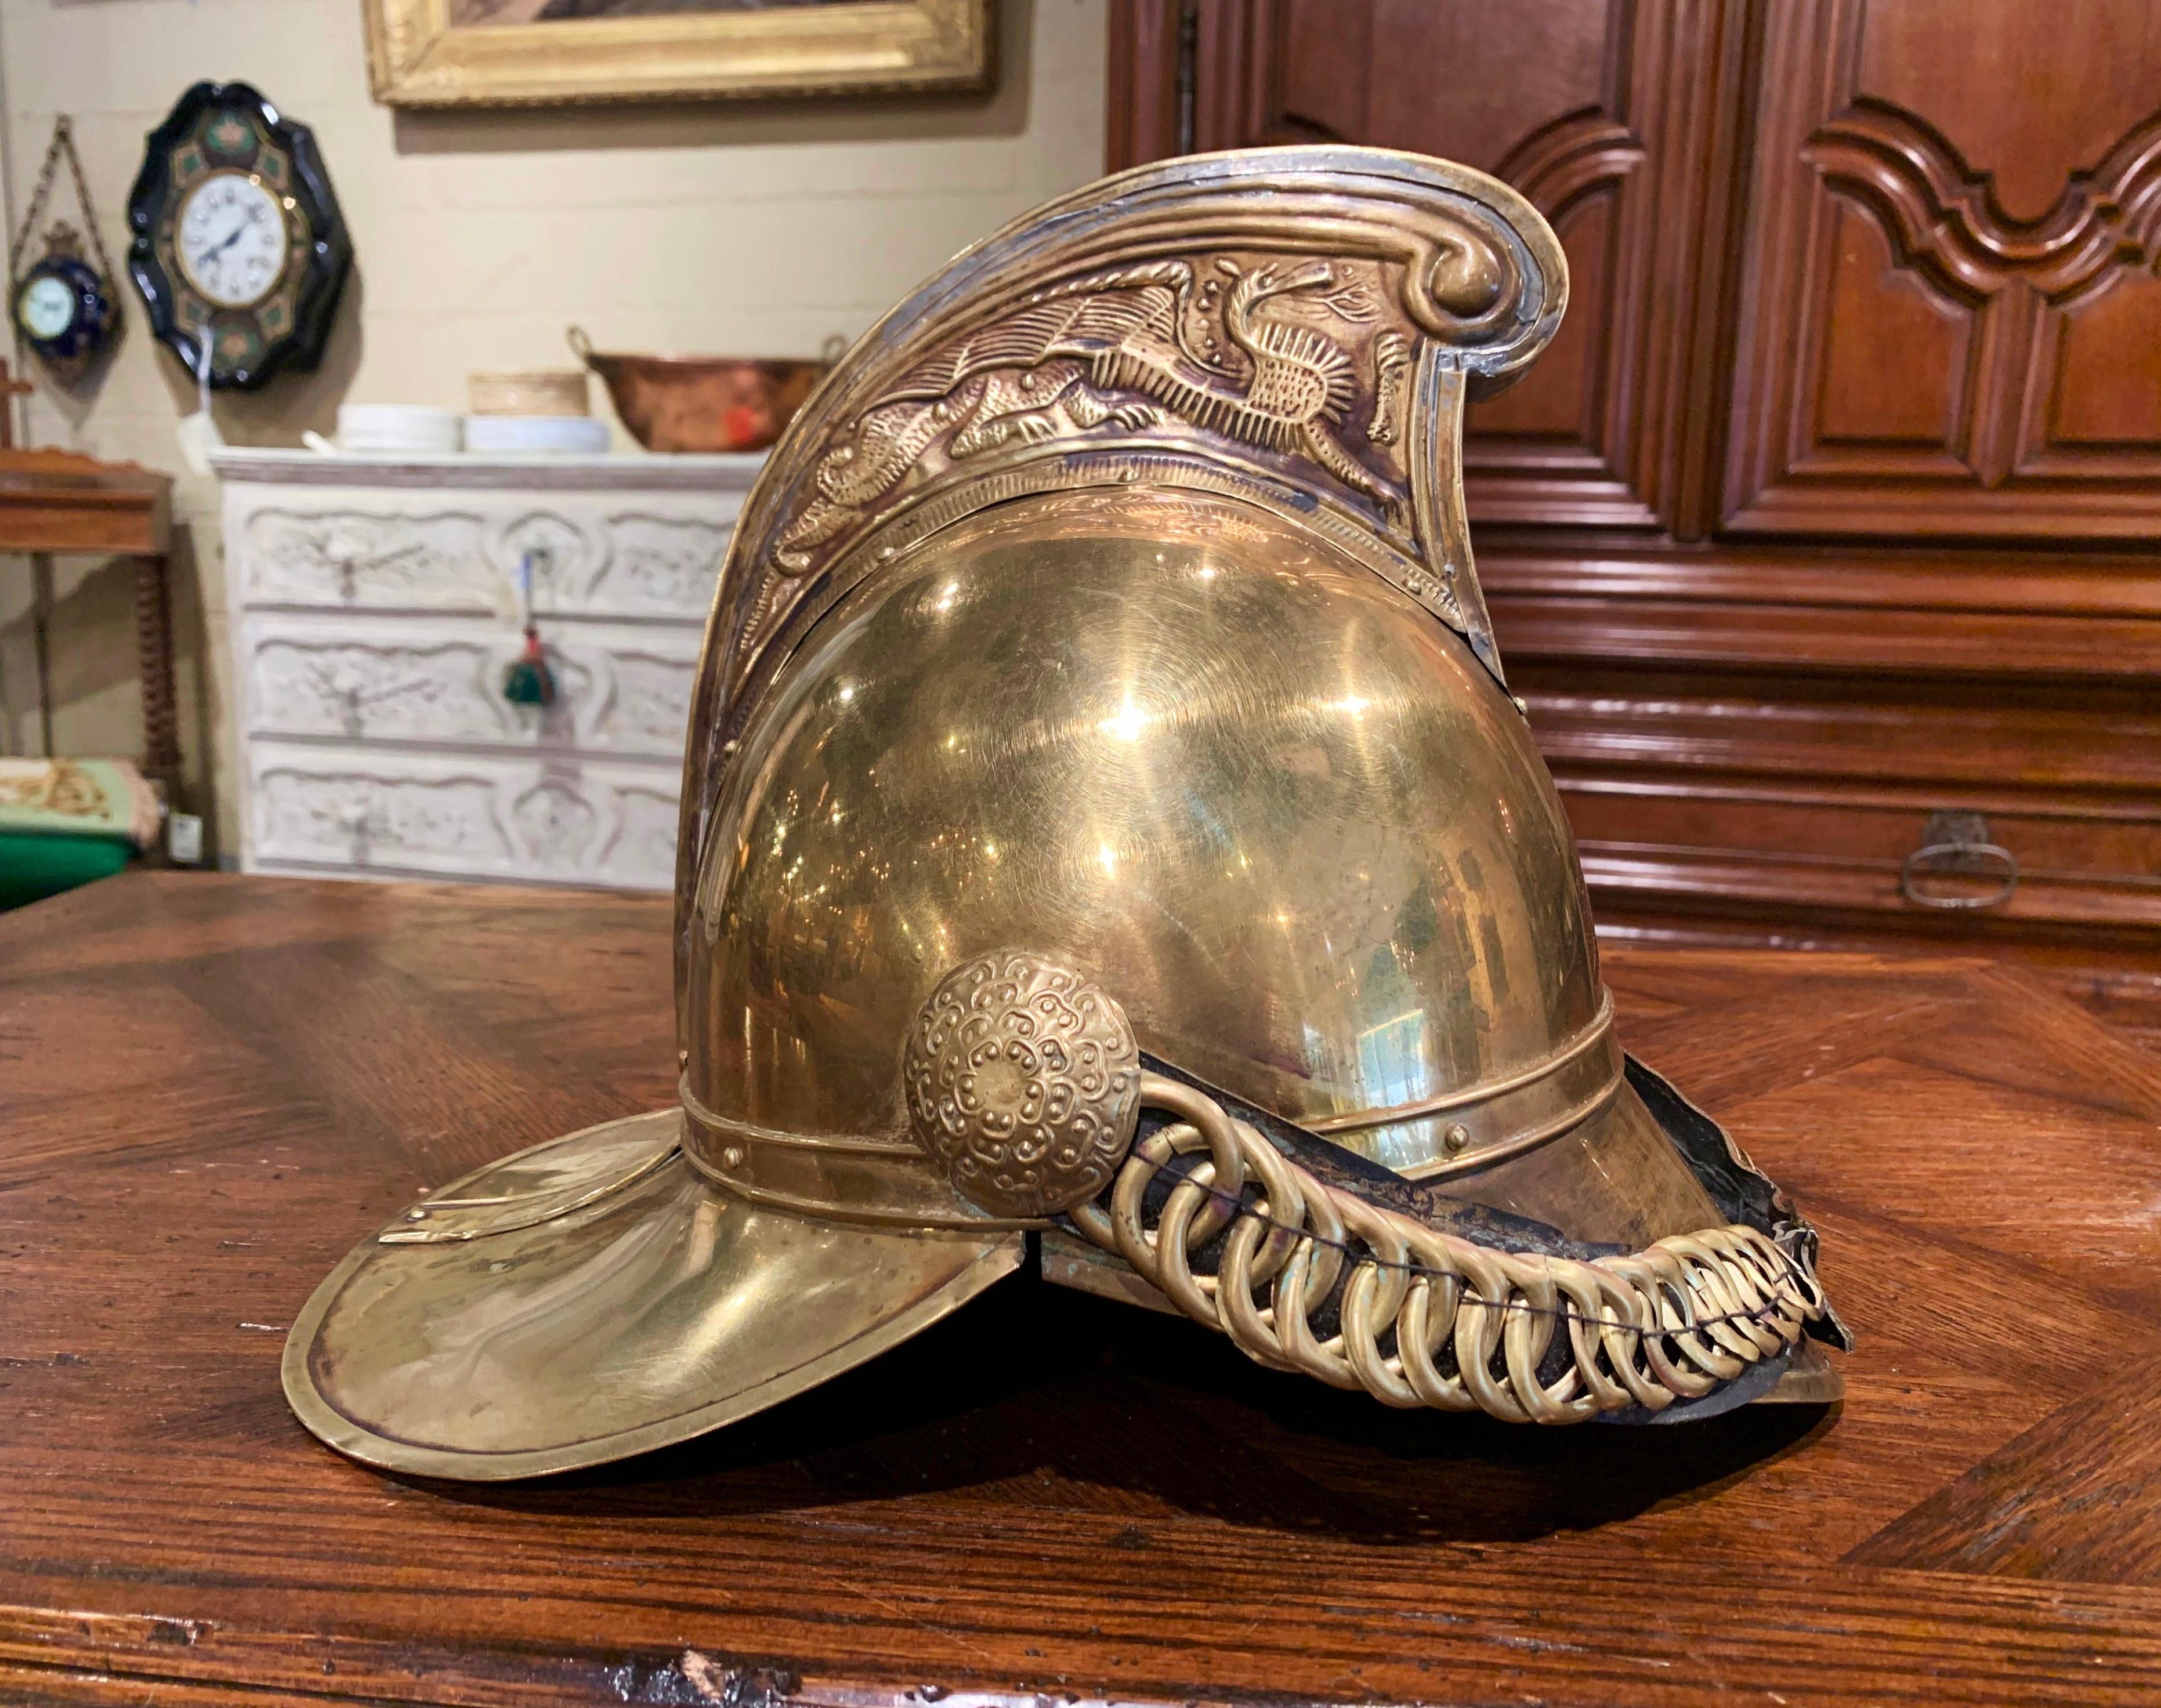 This beautiful antique fireman helmet was crafted in France circa 1880; worn by the 